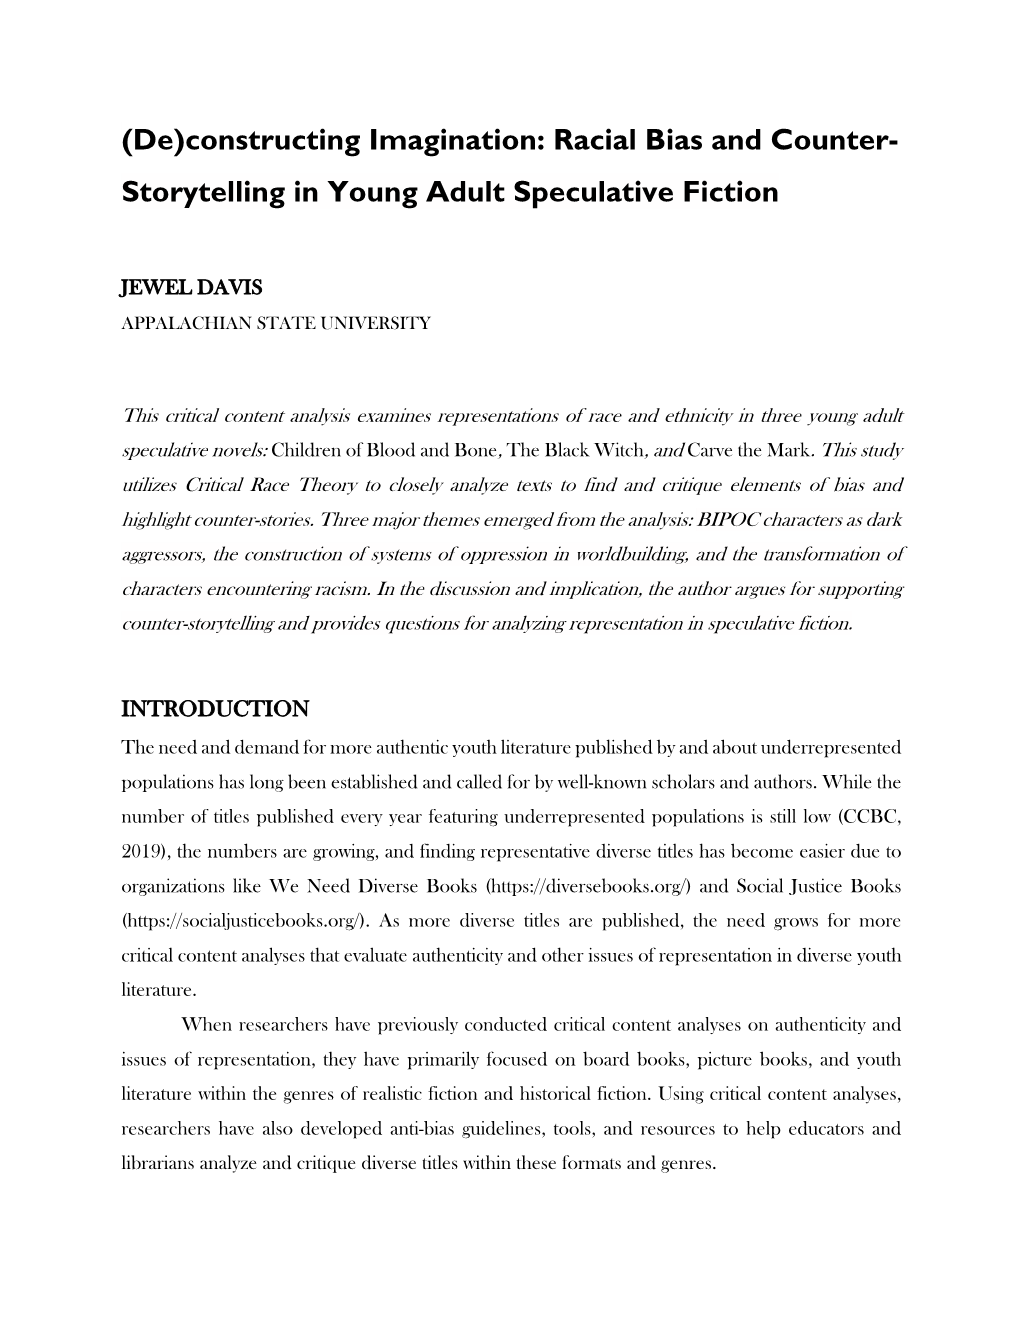 Storytelling in Young Adult Speculative Fiction